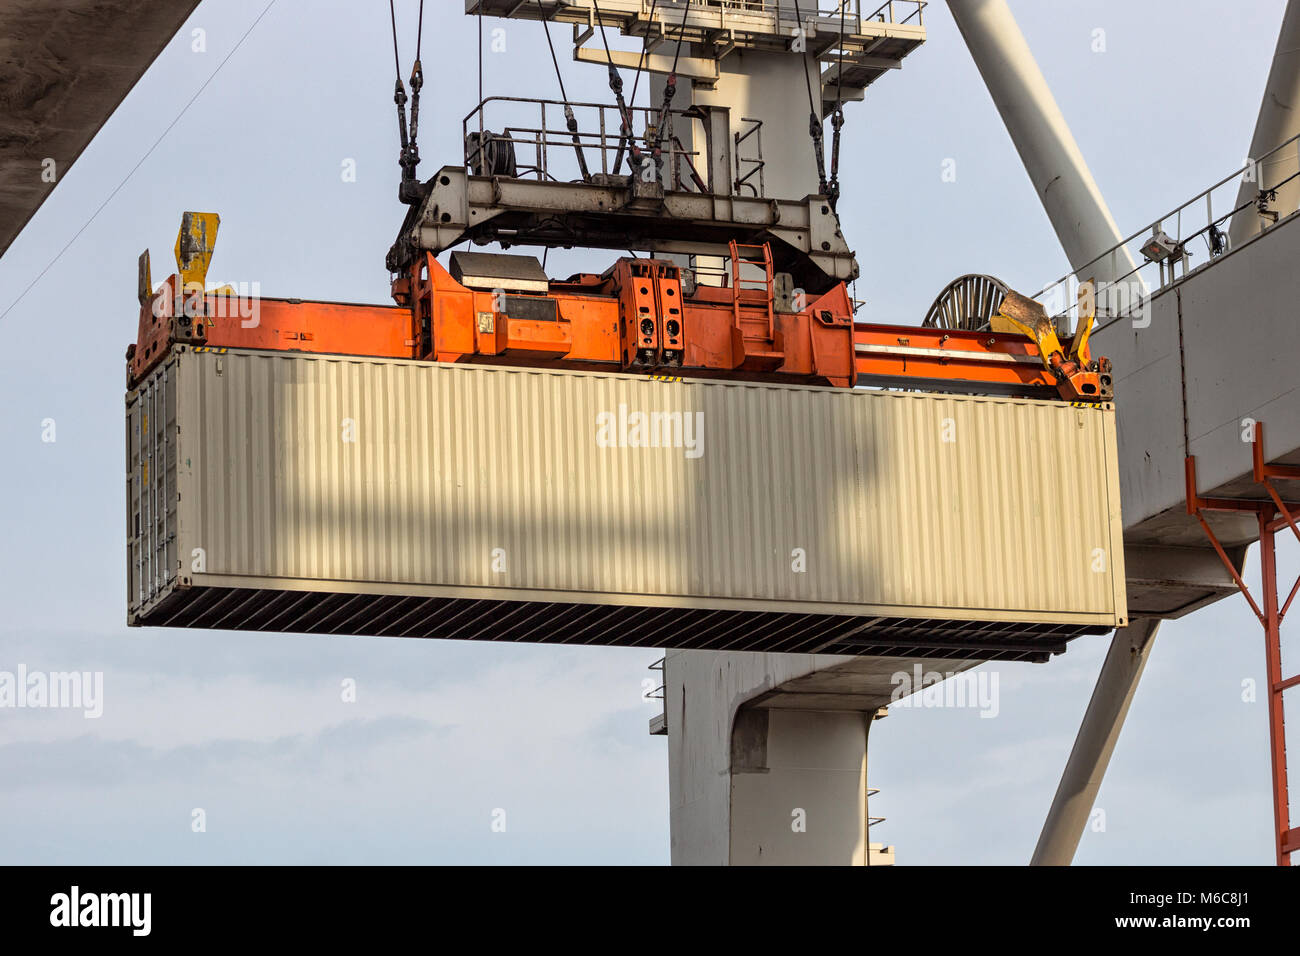 Cargo container lifted by a gantry crane in a industrial shipping terminal in a port. Stock Photo